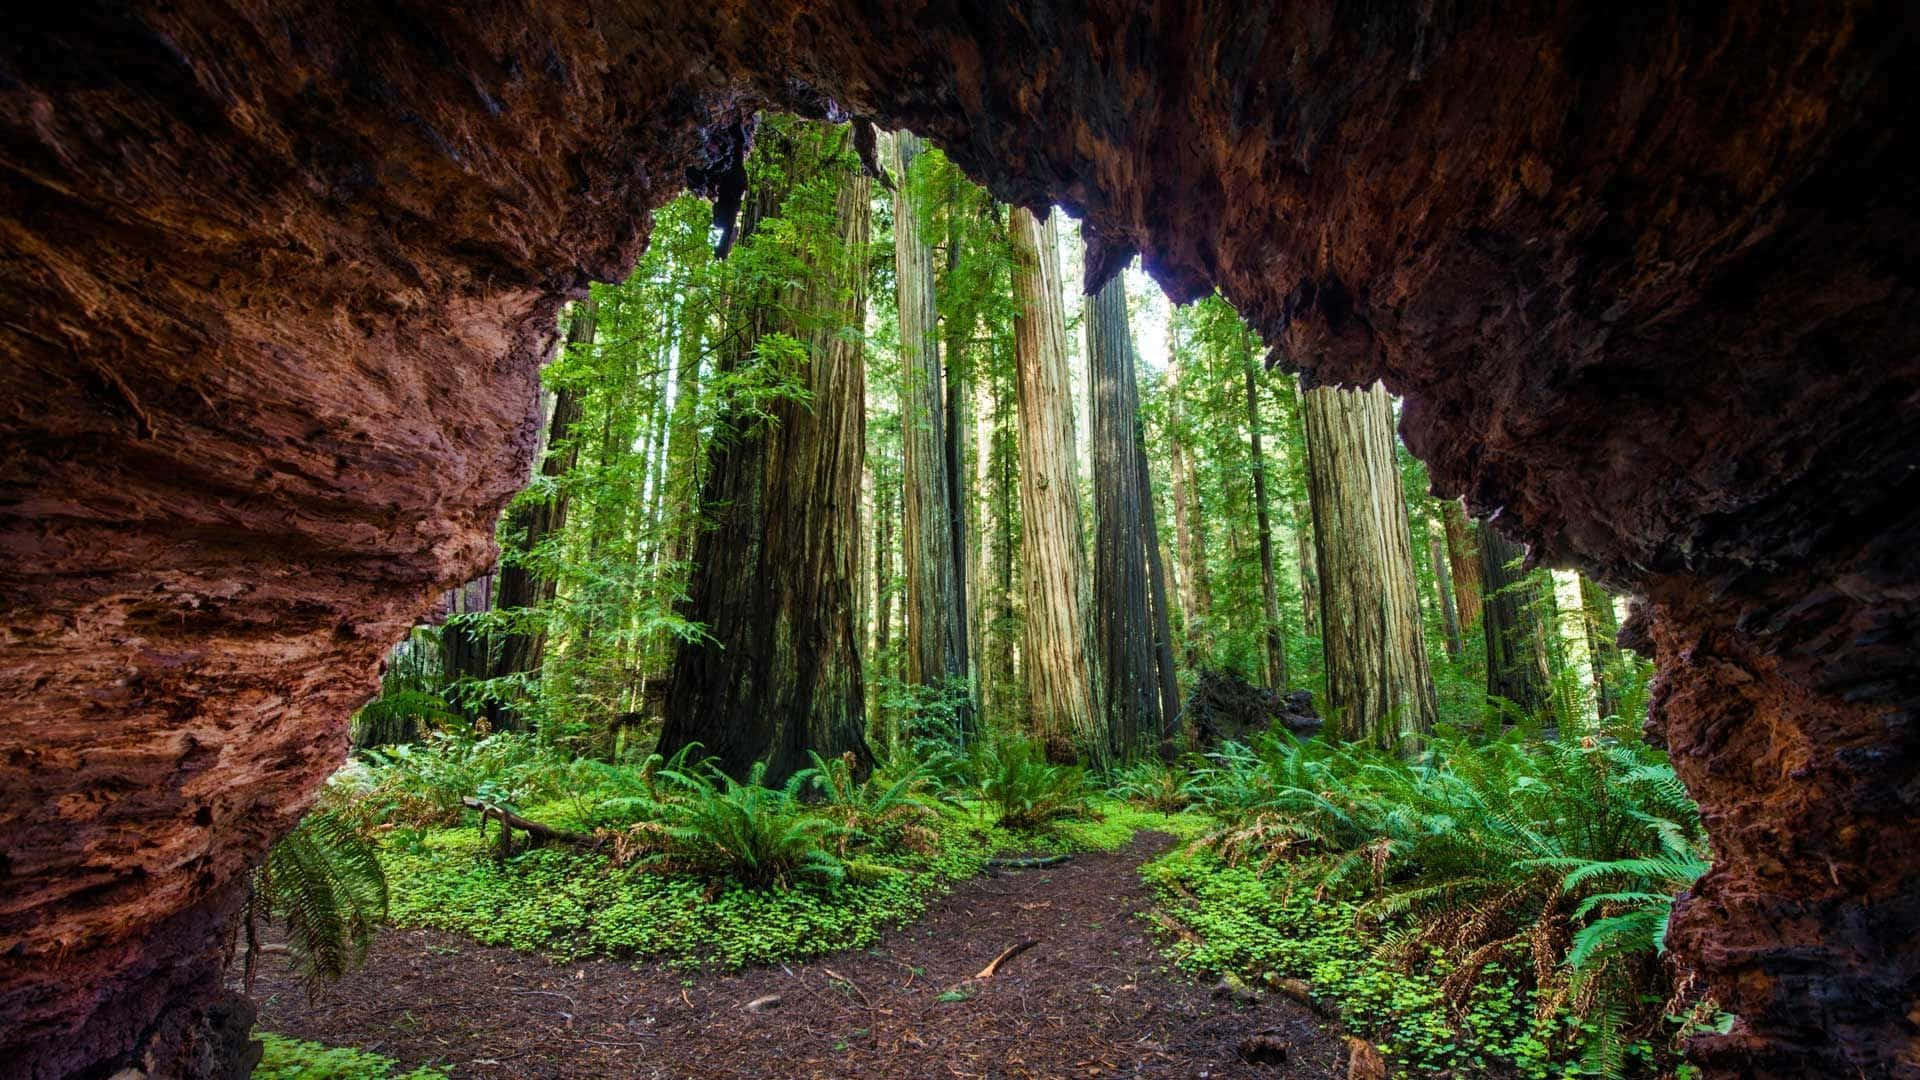 "Dense Redwood Forest in Northern California"